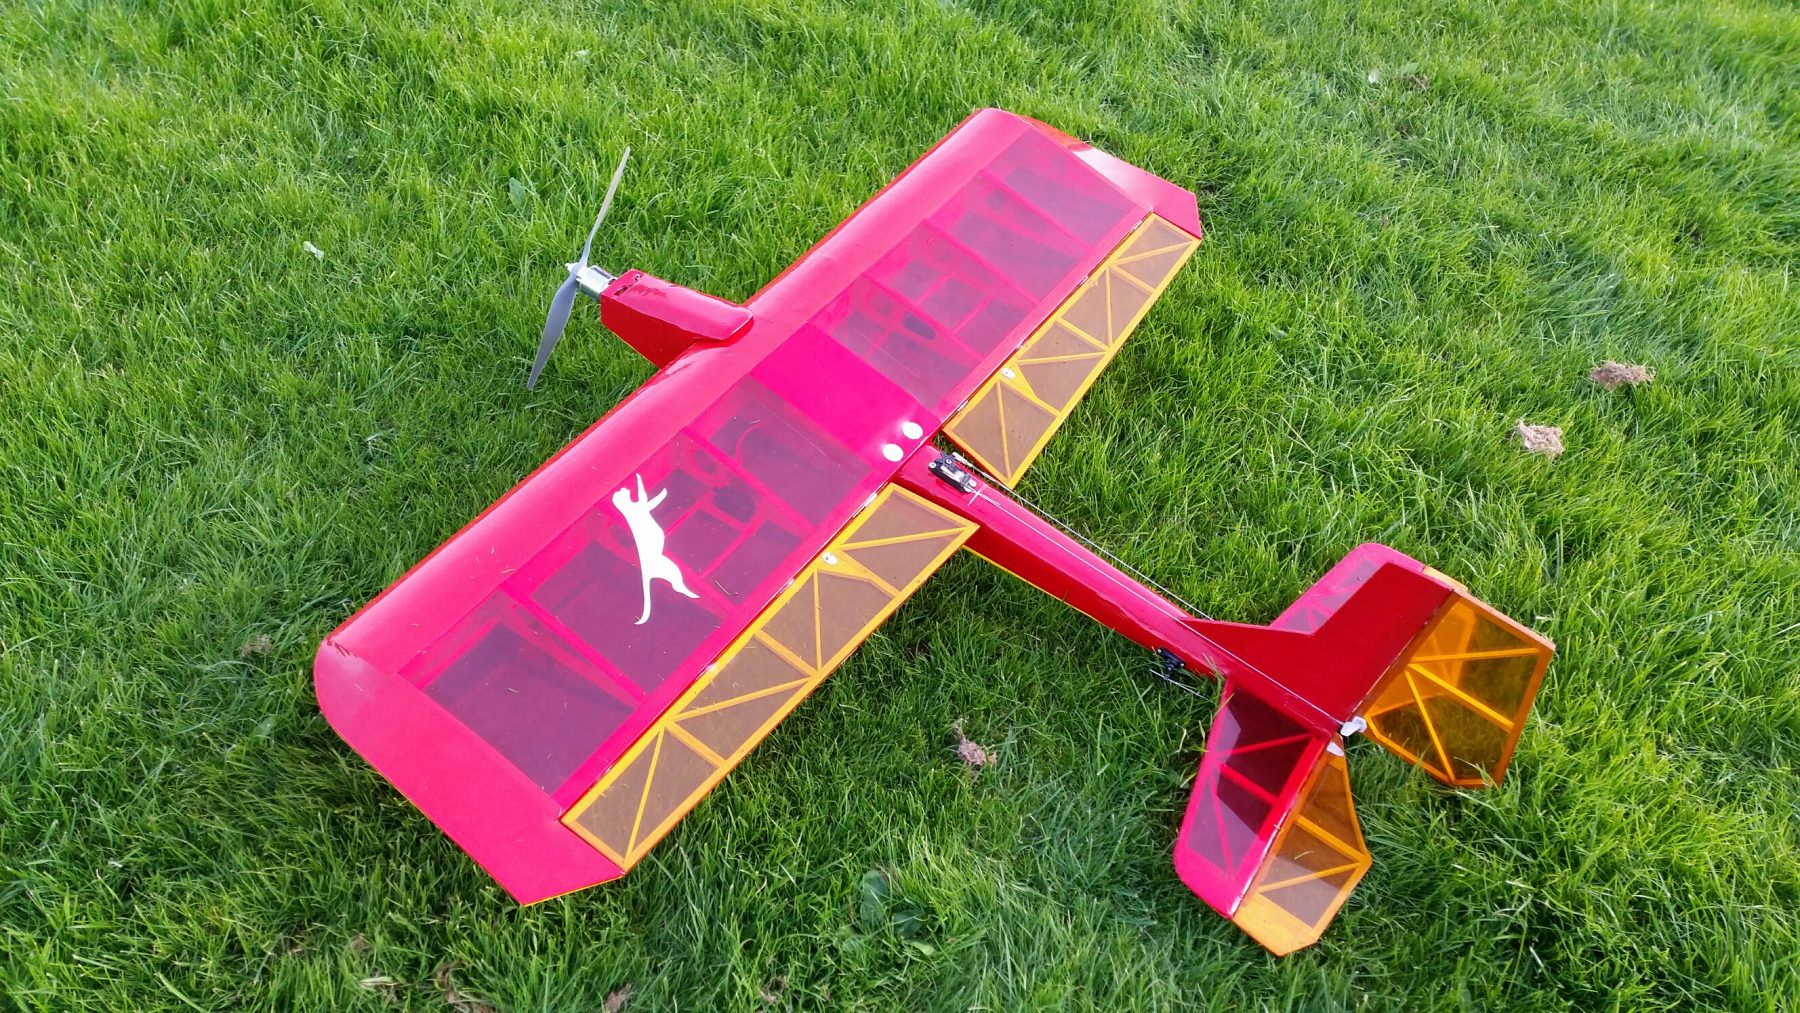 Repairing a radio-controlled plane with epoxy